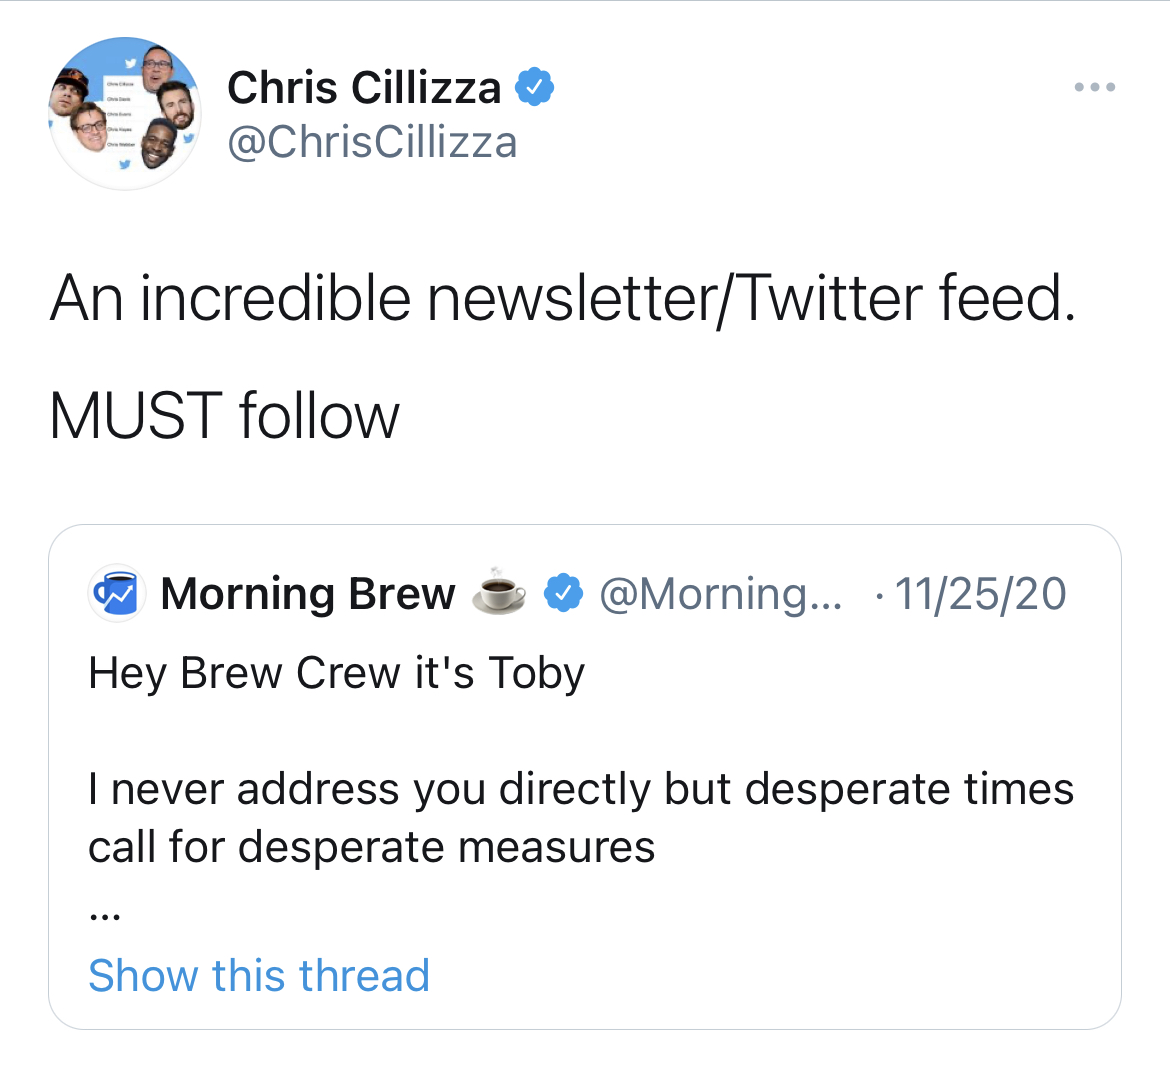 7/ Follower pushesThe  #MorningBrewTo100k was a great community momentAustin had the idea of “putting Toby’s job on the line”Inside joke Breaking the 4th wall Cause to rally behind 